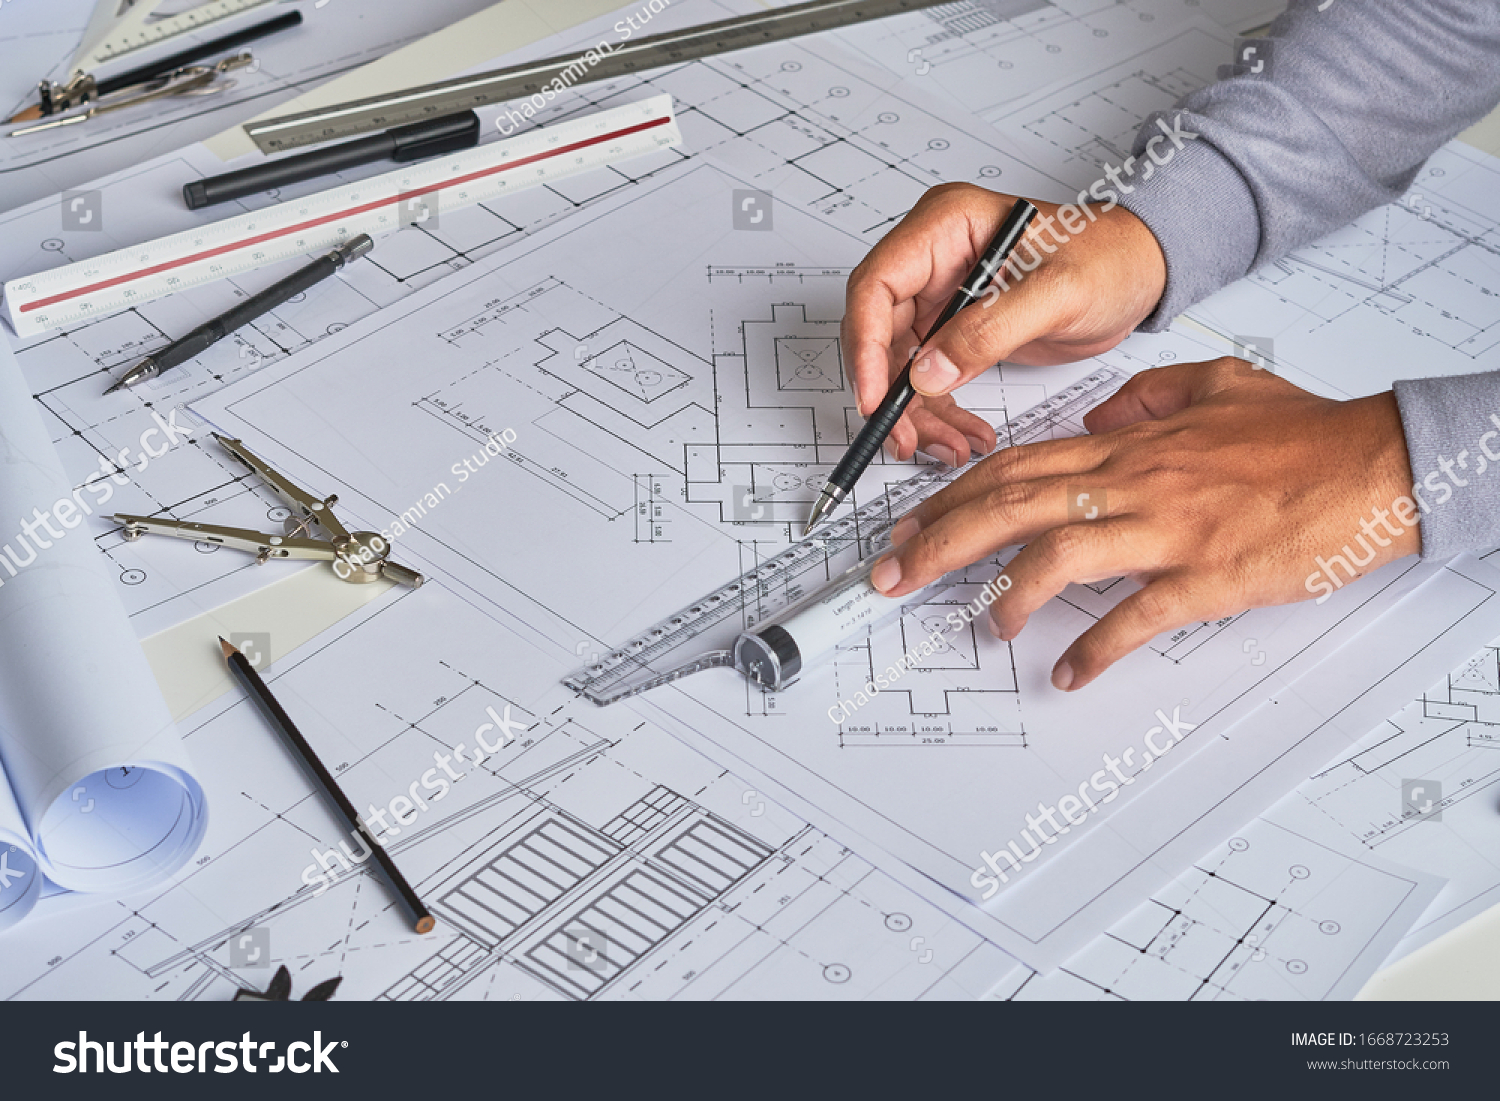 Architect engineer contractor design working drawing sketch plan blueprint and making architectural construction house building in architect studio.                              #1668723253